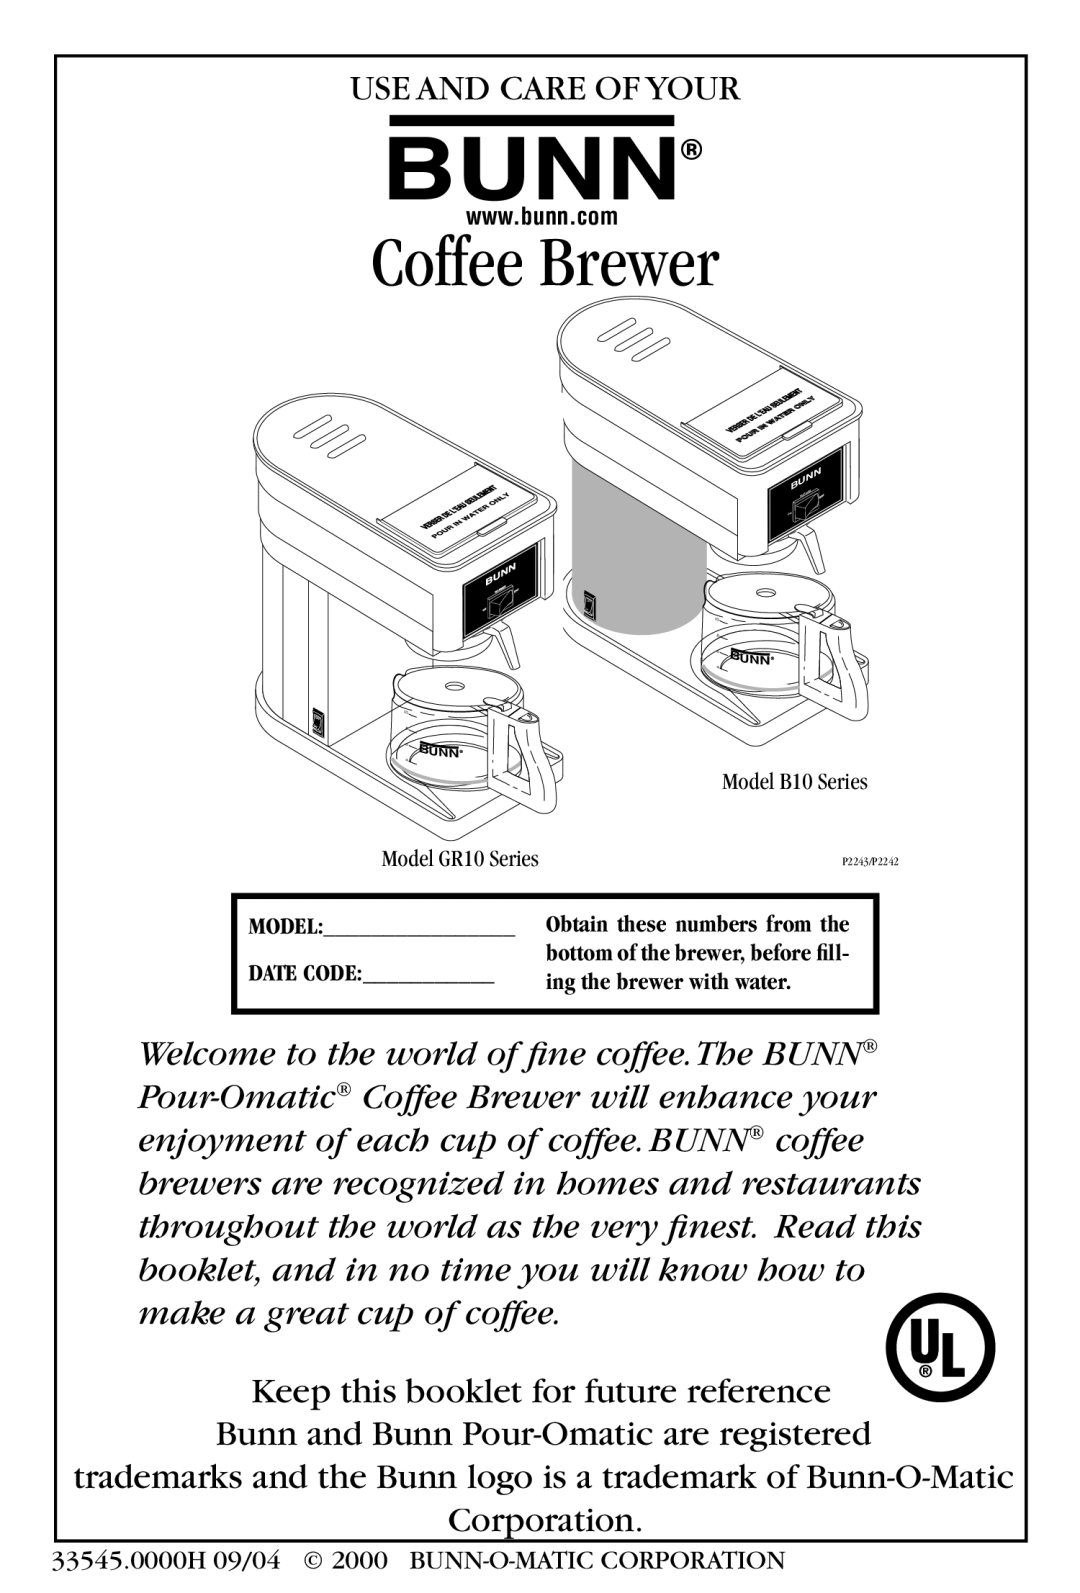 Bunn B10, GR10 manual Coffee Brewer, Keep this booklet for future reference 